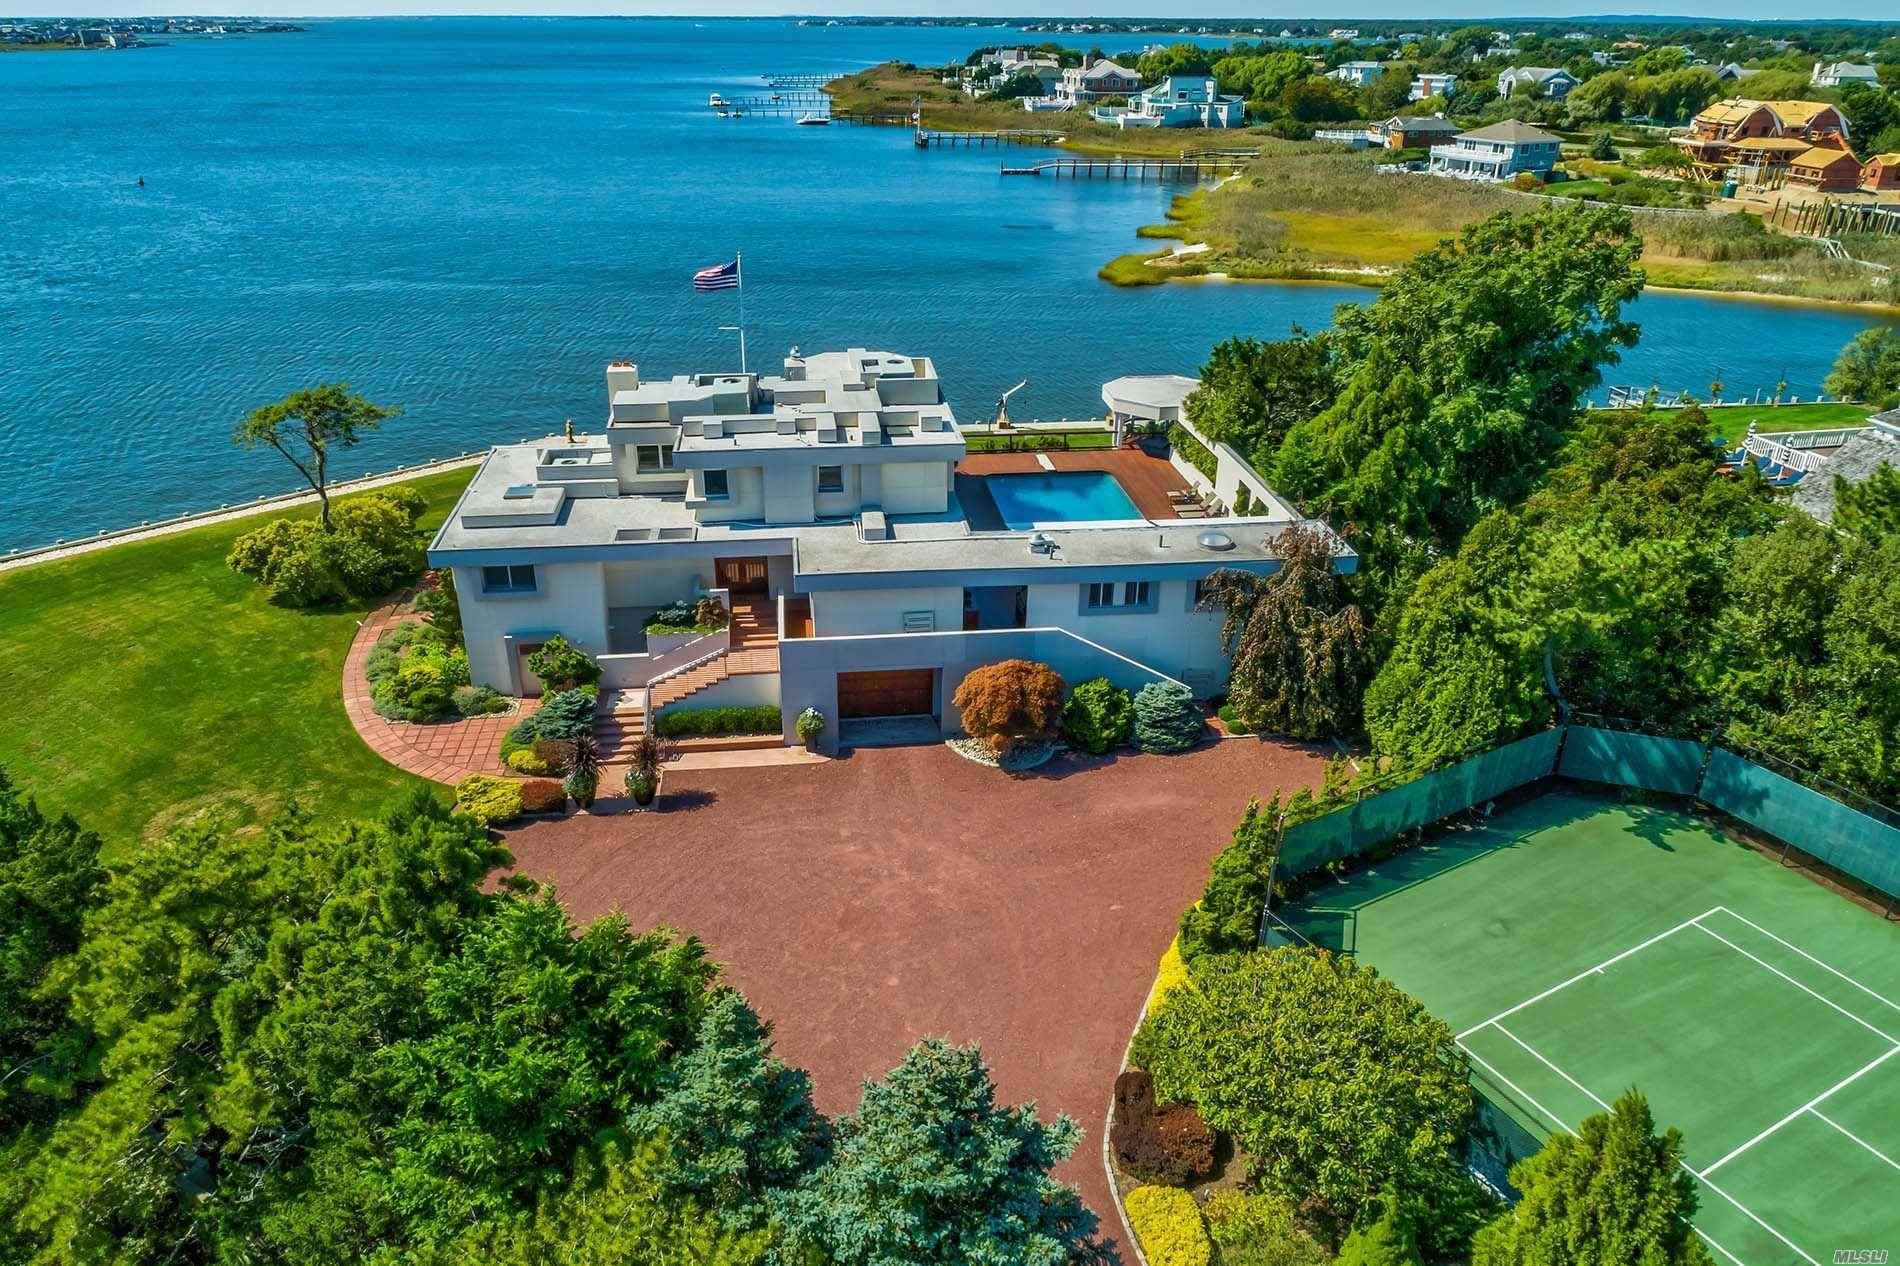 Set on 1. 31 acres sits a modern 5000sf waterfront home offering 6 bedrooms, 6 baths and meticulous mahogany and glass details throughout.